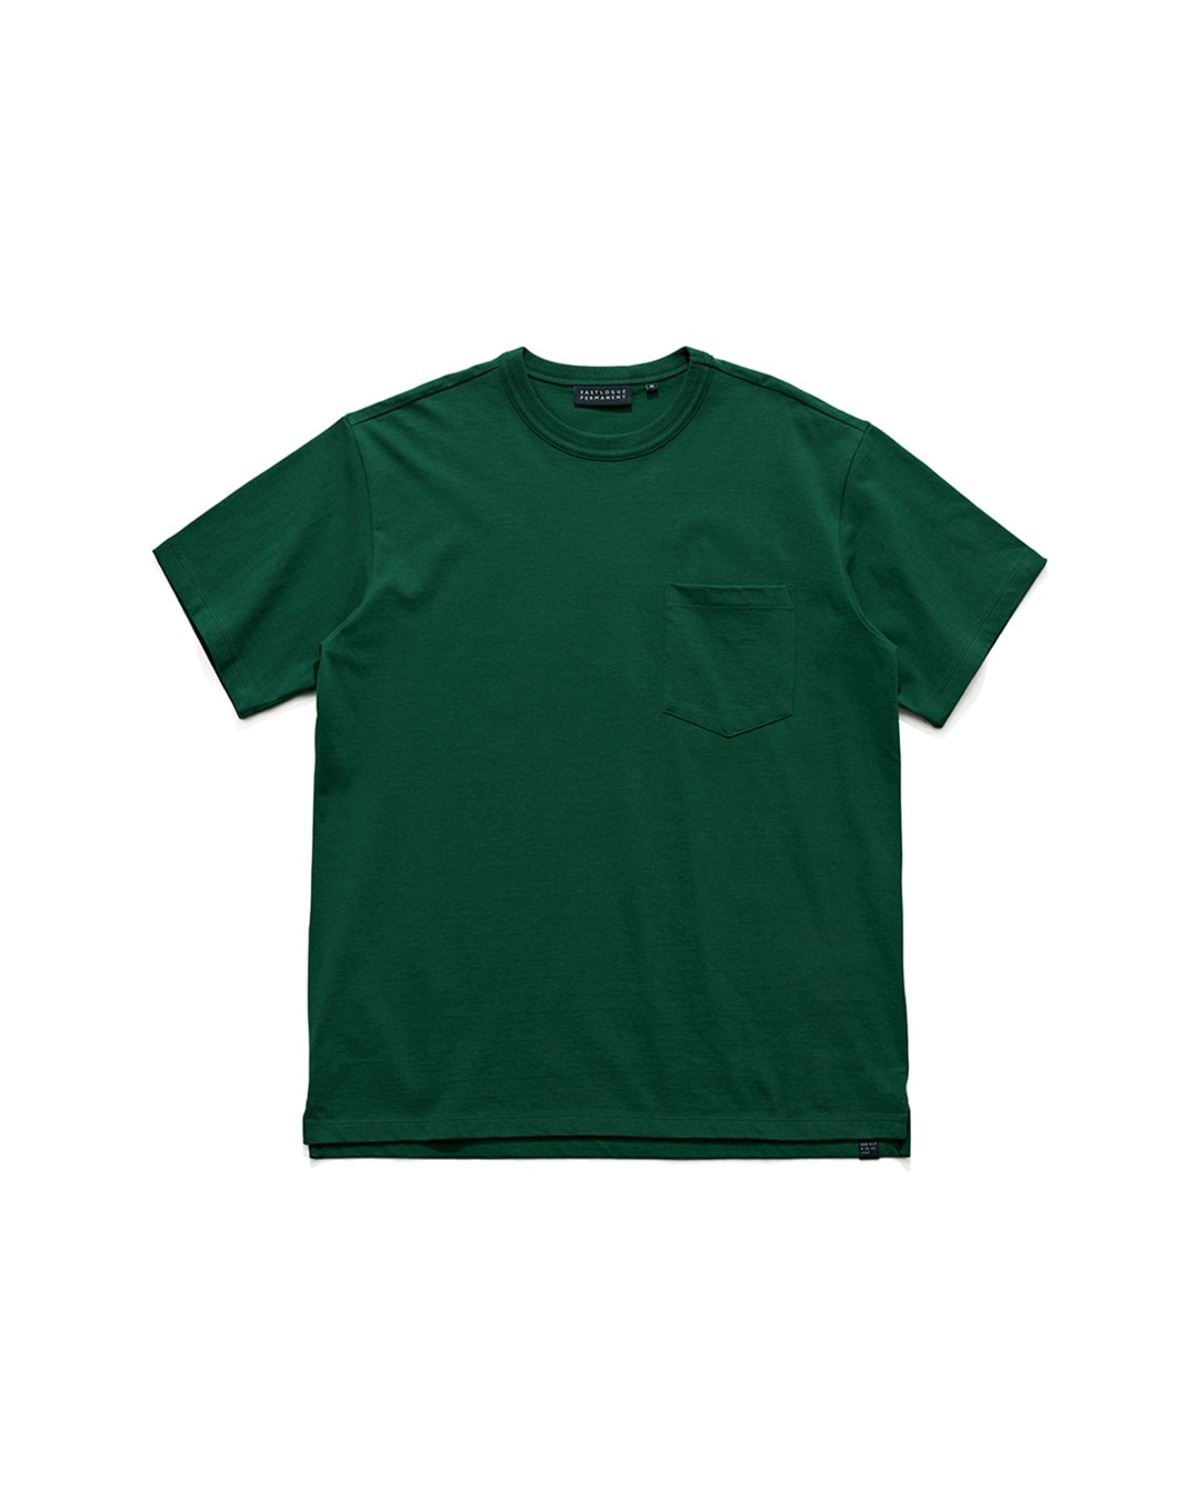 ONE POCKET T-SHIRT / FOREST GREEN